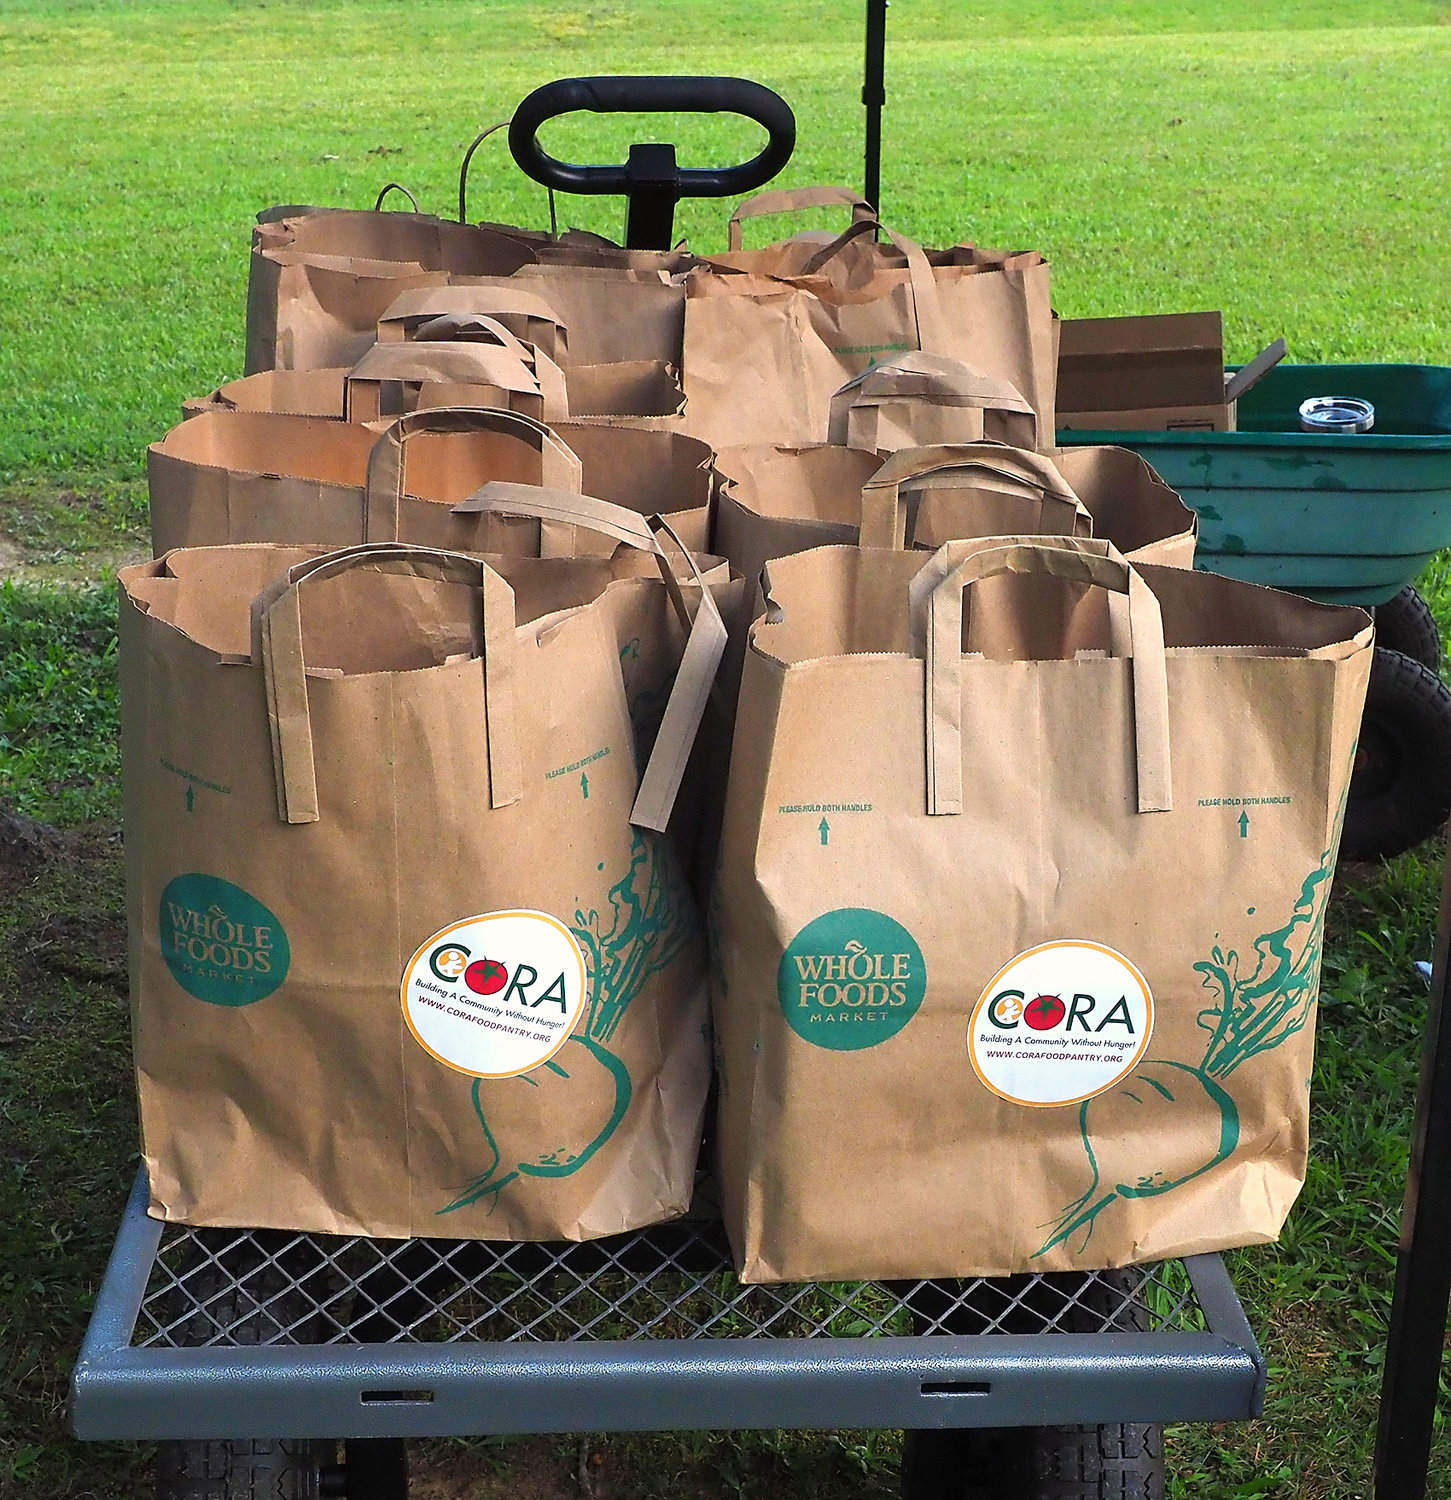 Pittsboro's CORA Food Pantry supplied grocery bags of shelf-stable food boxes, like these, for distribution last Saturday at Cedar Grove UMC for no charge.